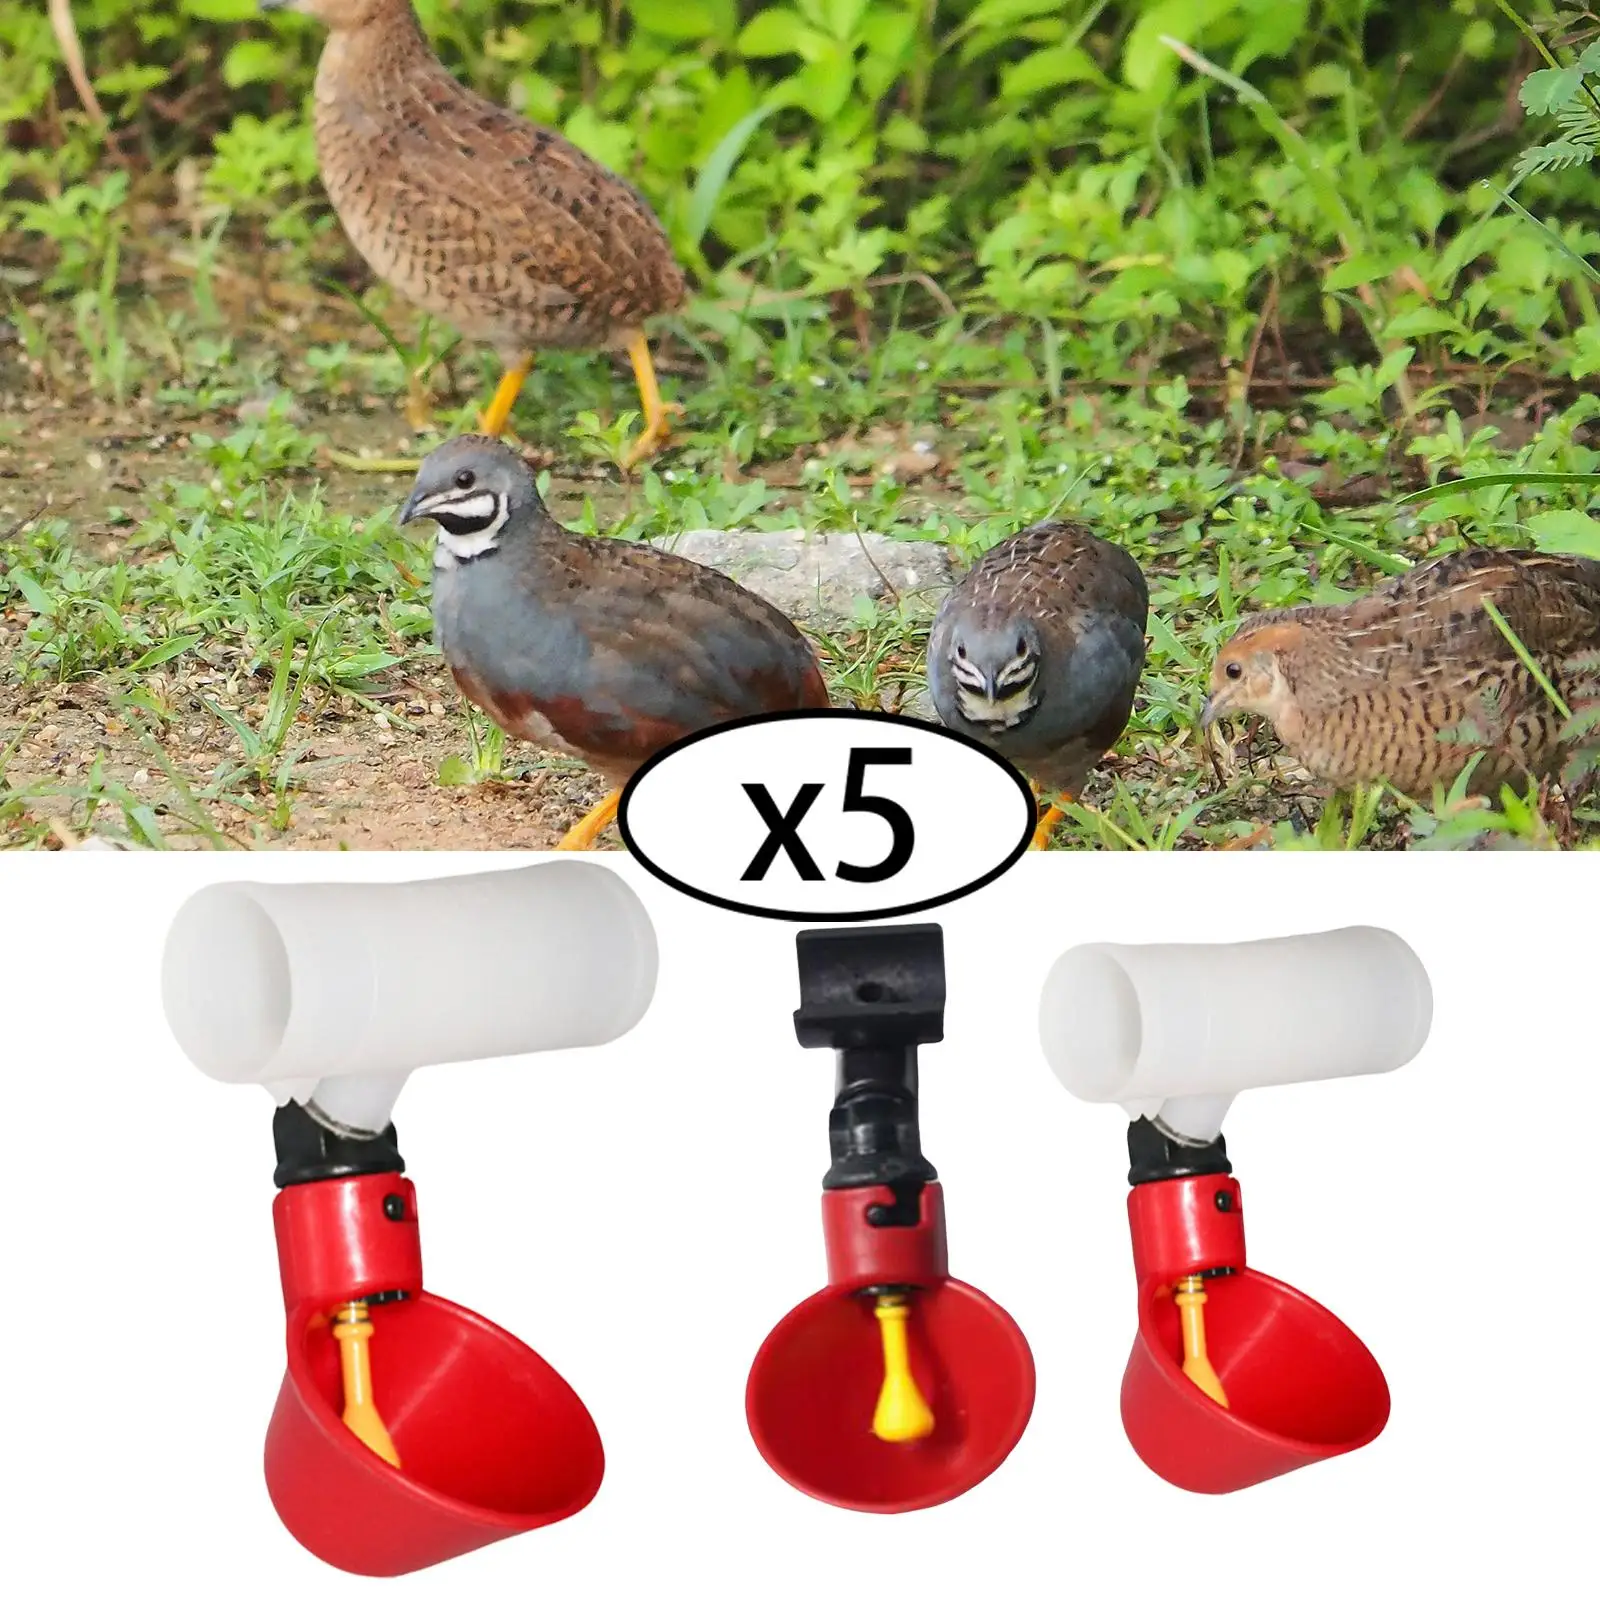 5 Pieces Automatic Chicken Drinkers Cups for Ducks Poultry Quail